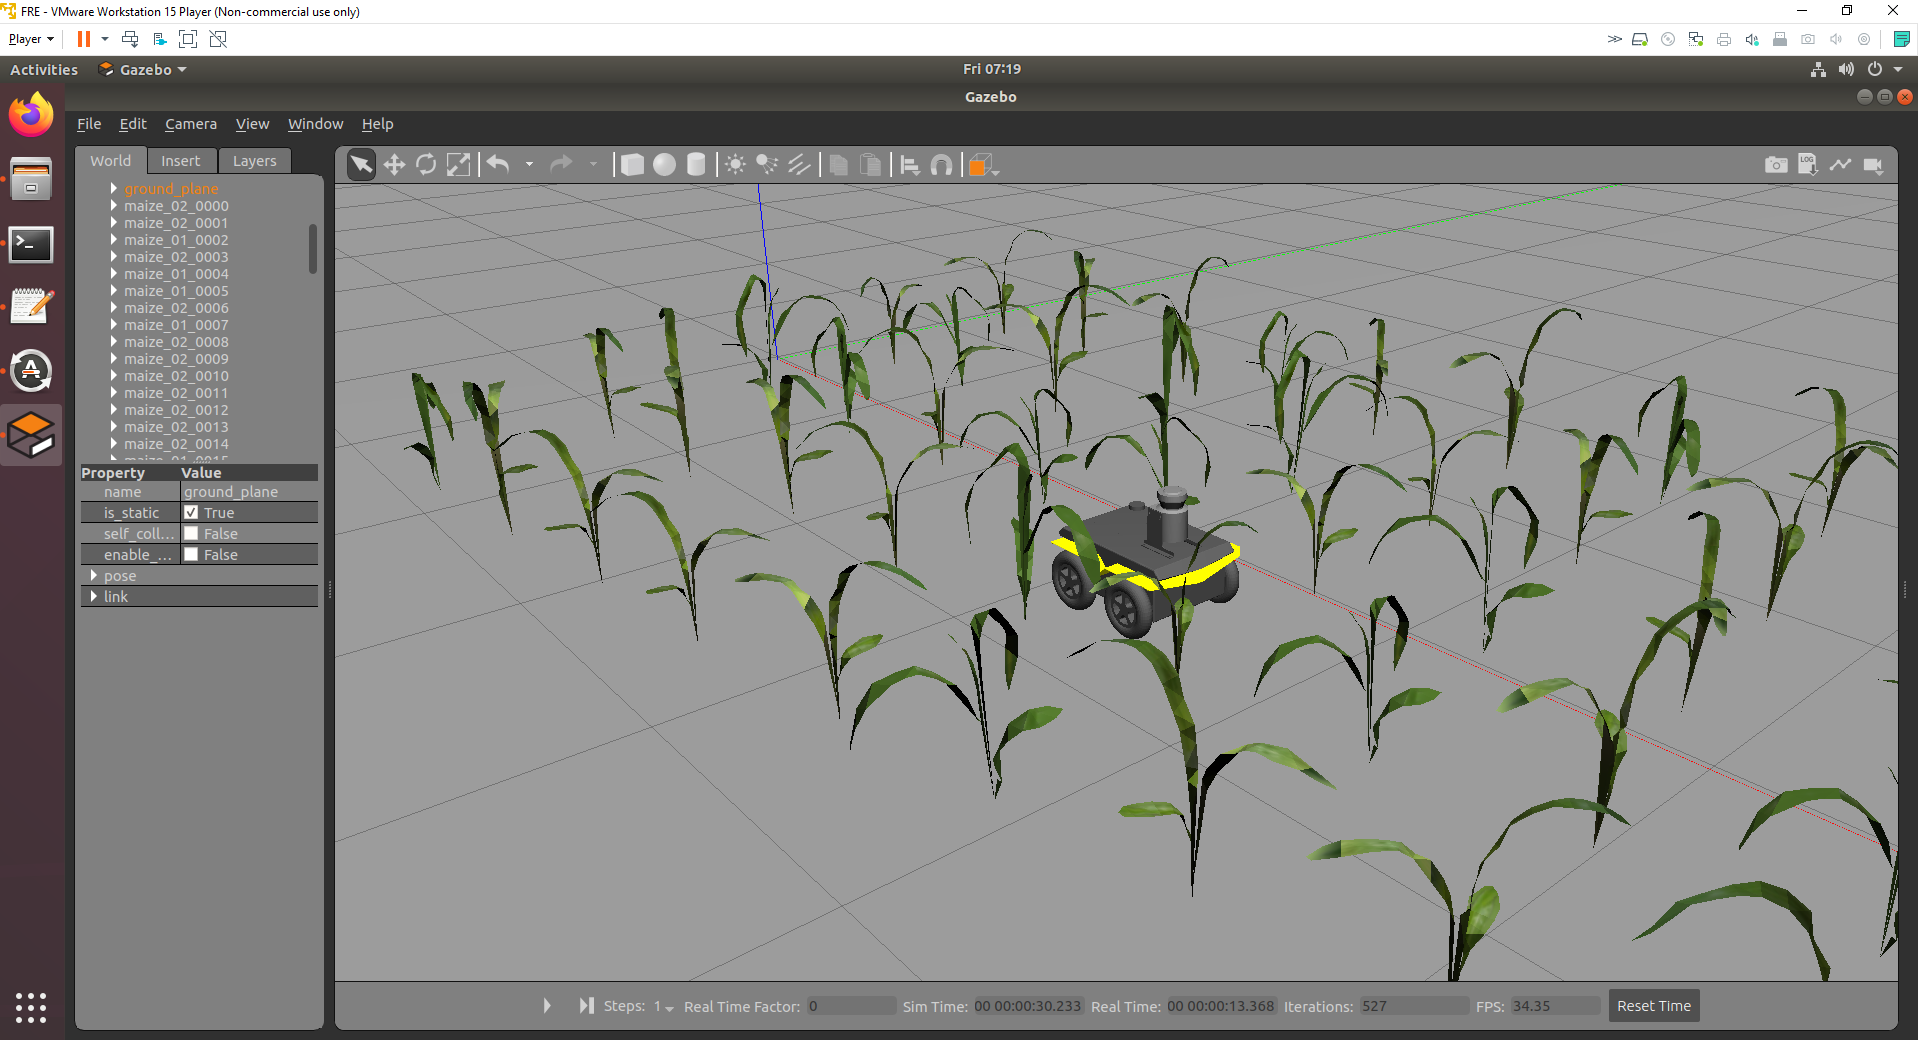 3D meshes of real maize plants.